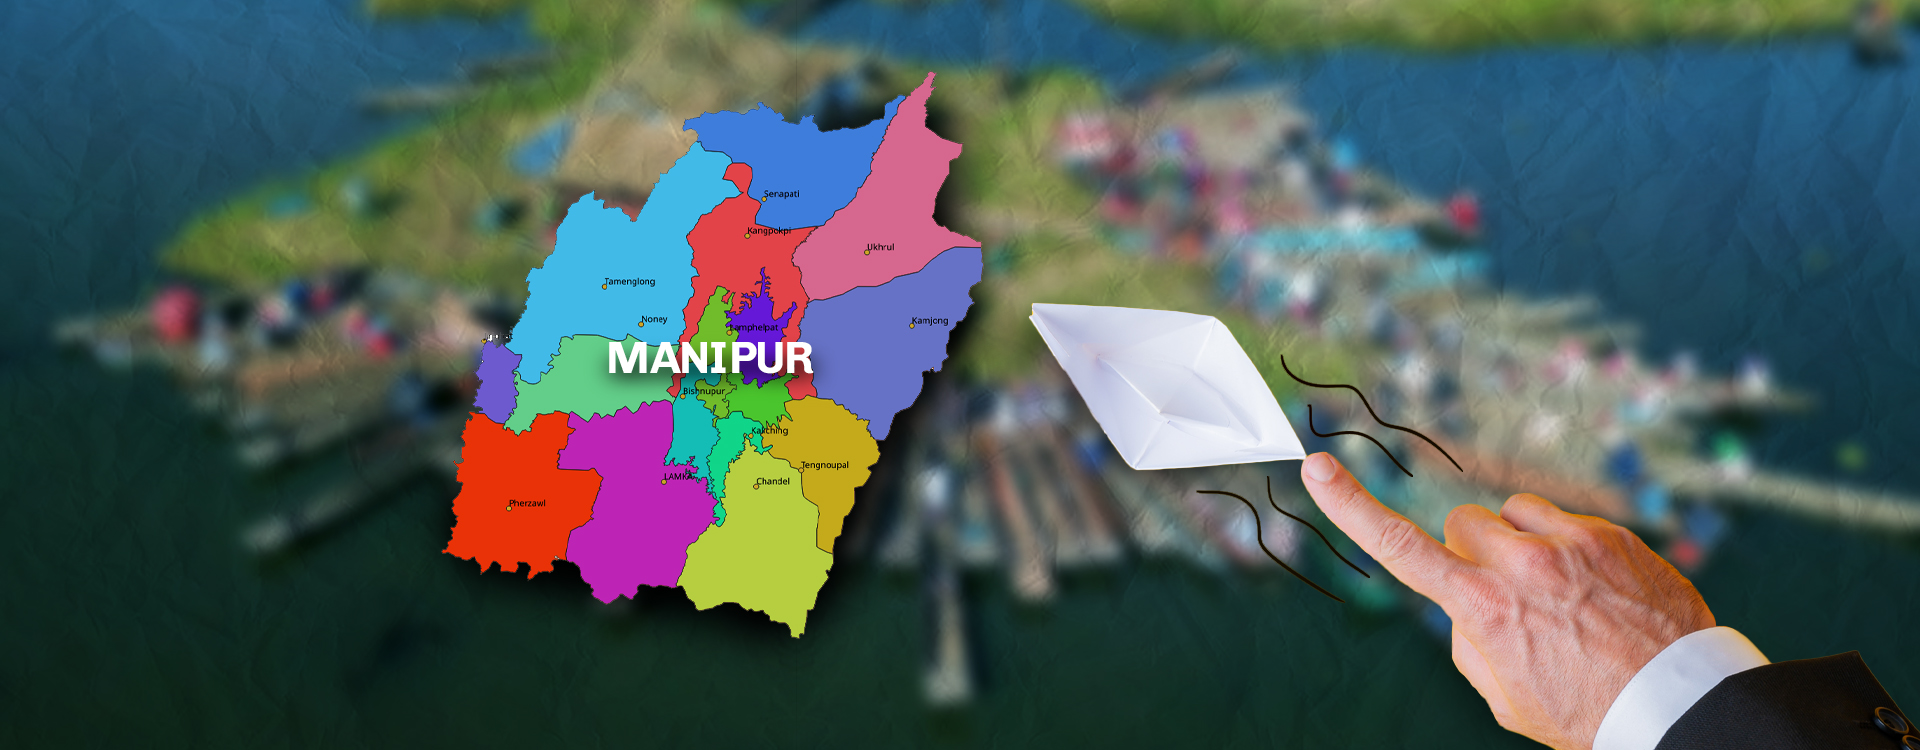 Manipur Startup sailing through and helping the state economy